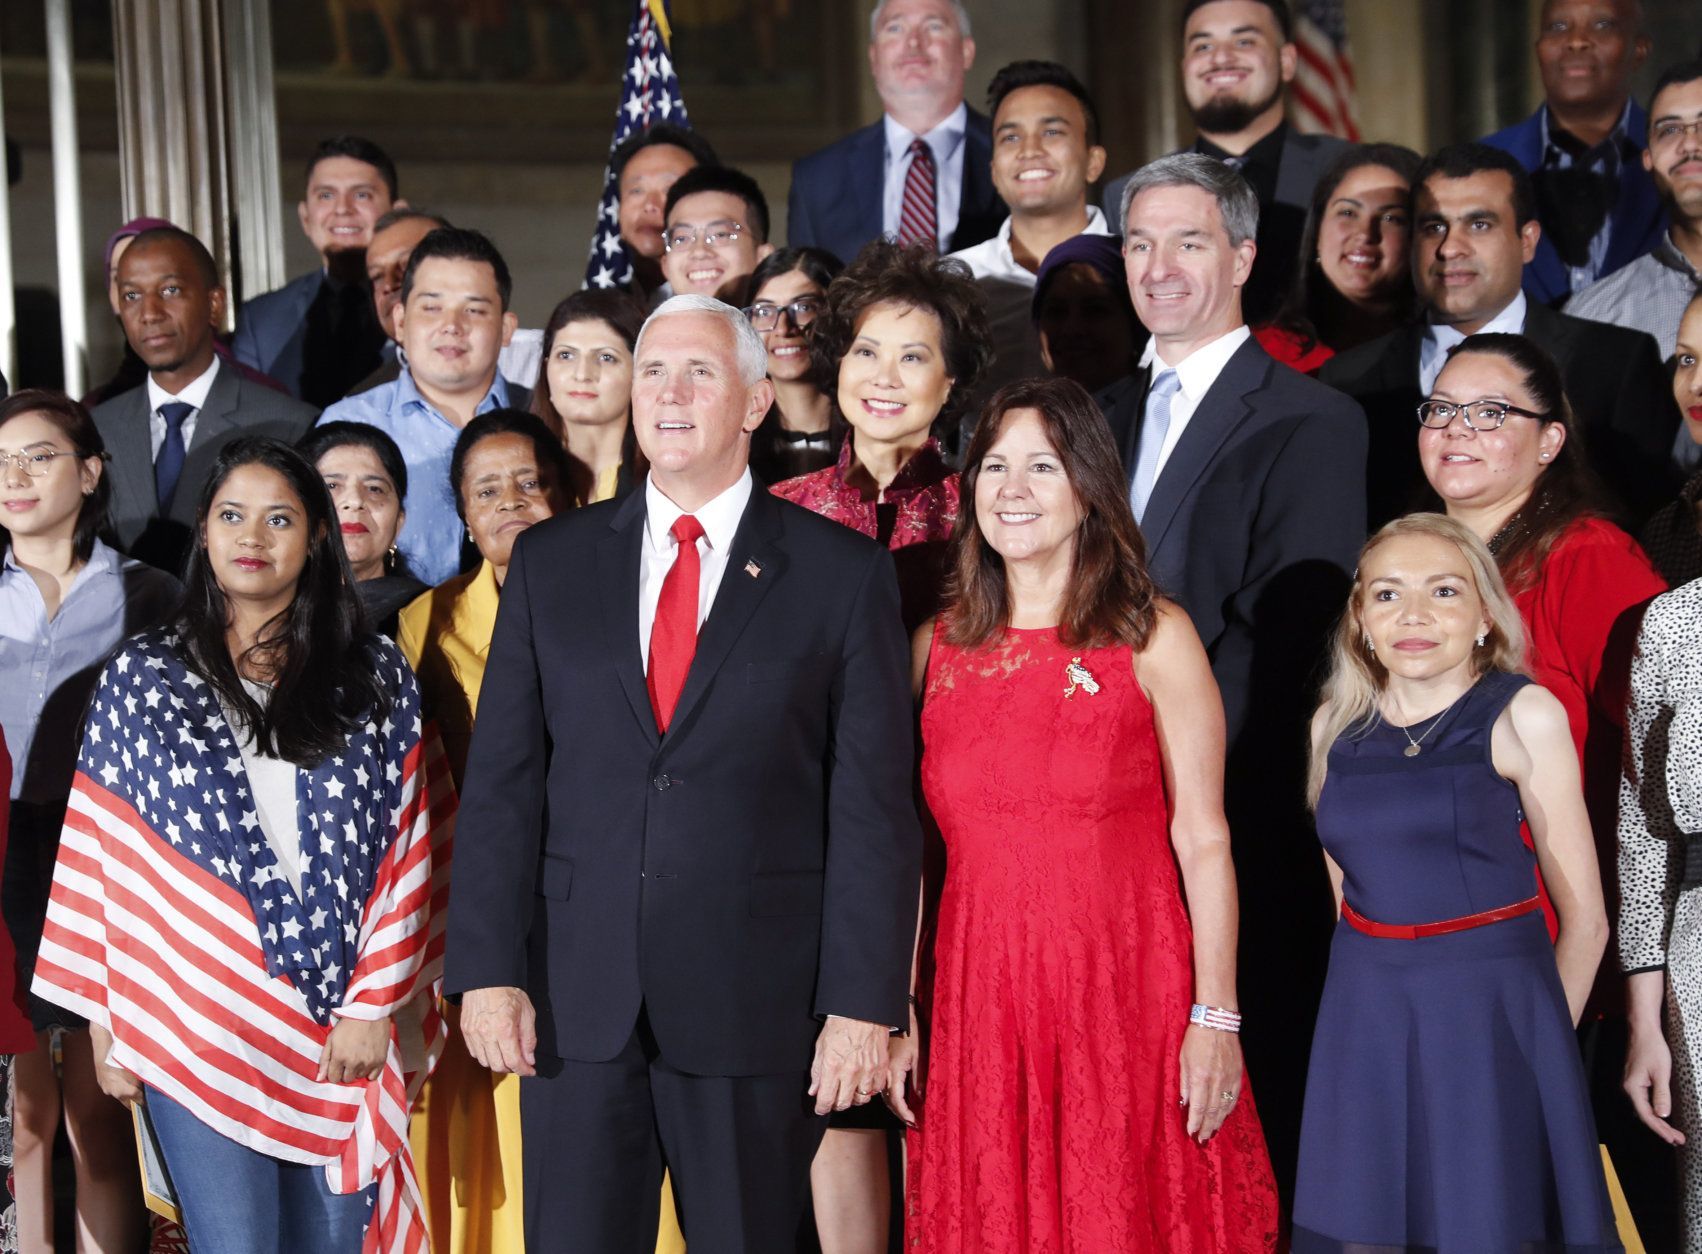 Vice President Mike Pence, center, his wife Karen Pence, to his right, pose for a group photo with new naturalized citizens following a naturalization ceremony in celebration of Independence Day at the National Archives in Washington, Thursday, July 4, 2019. Standing behind the Vice President are Secretary of Transportation Elaine Chao and Acting Director, US Immigration and Immigration Services, Kenneth T. Cuccinelli. (AP Photo/Pablo Martinez Monsivais)